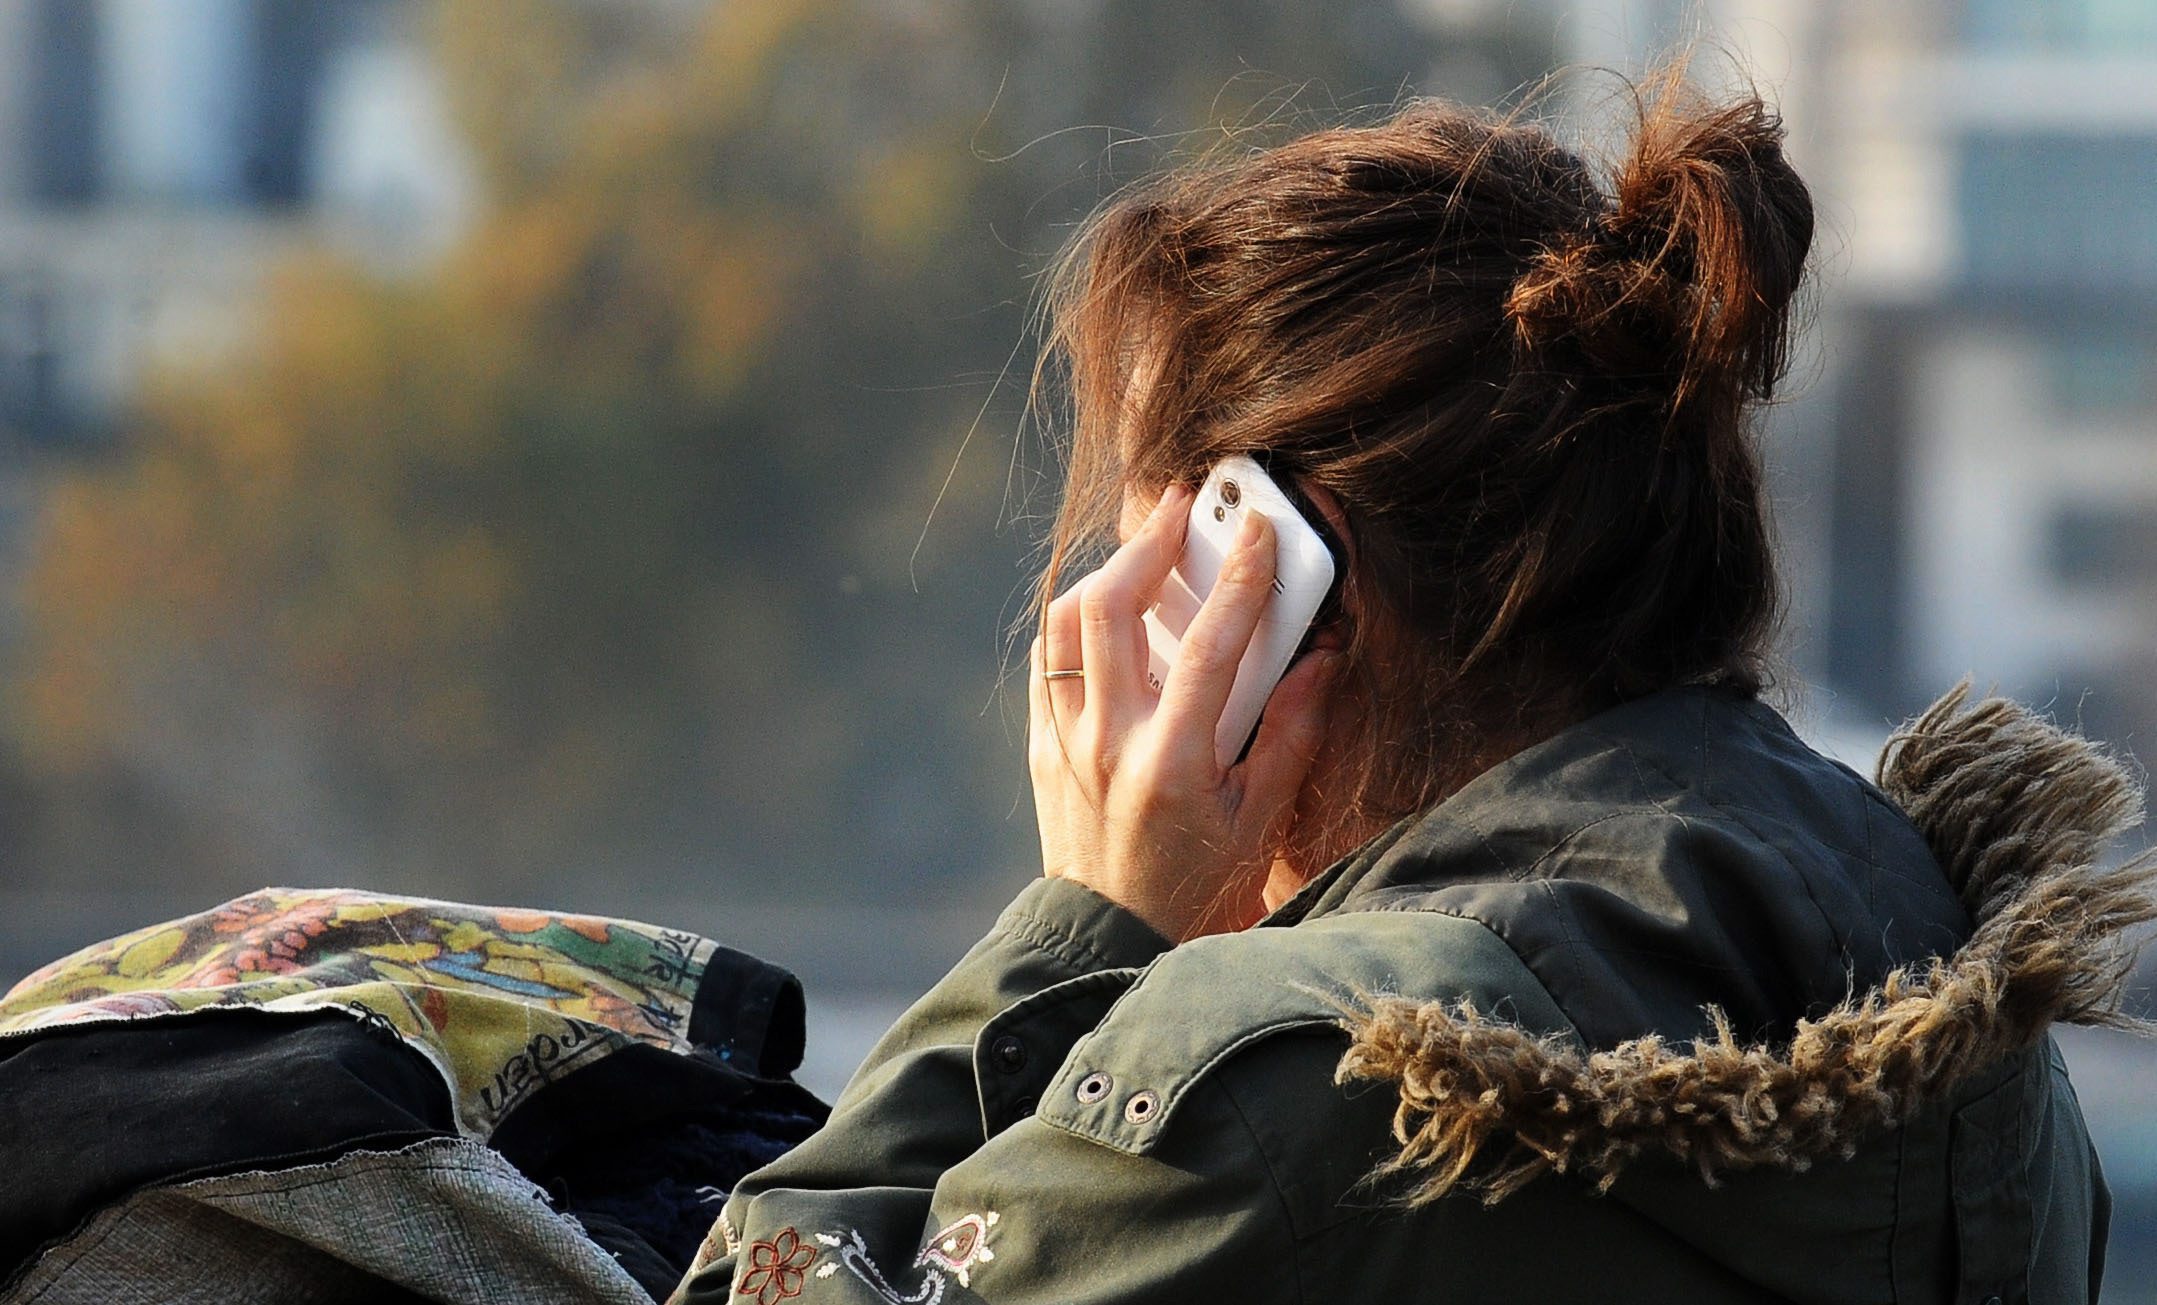 Spain's telecoms companies agree to stop making nuisance calls during 'siesta' hour and to start later in the morning